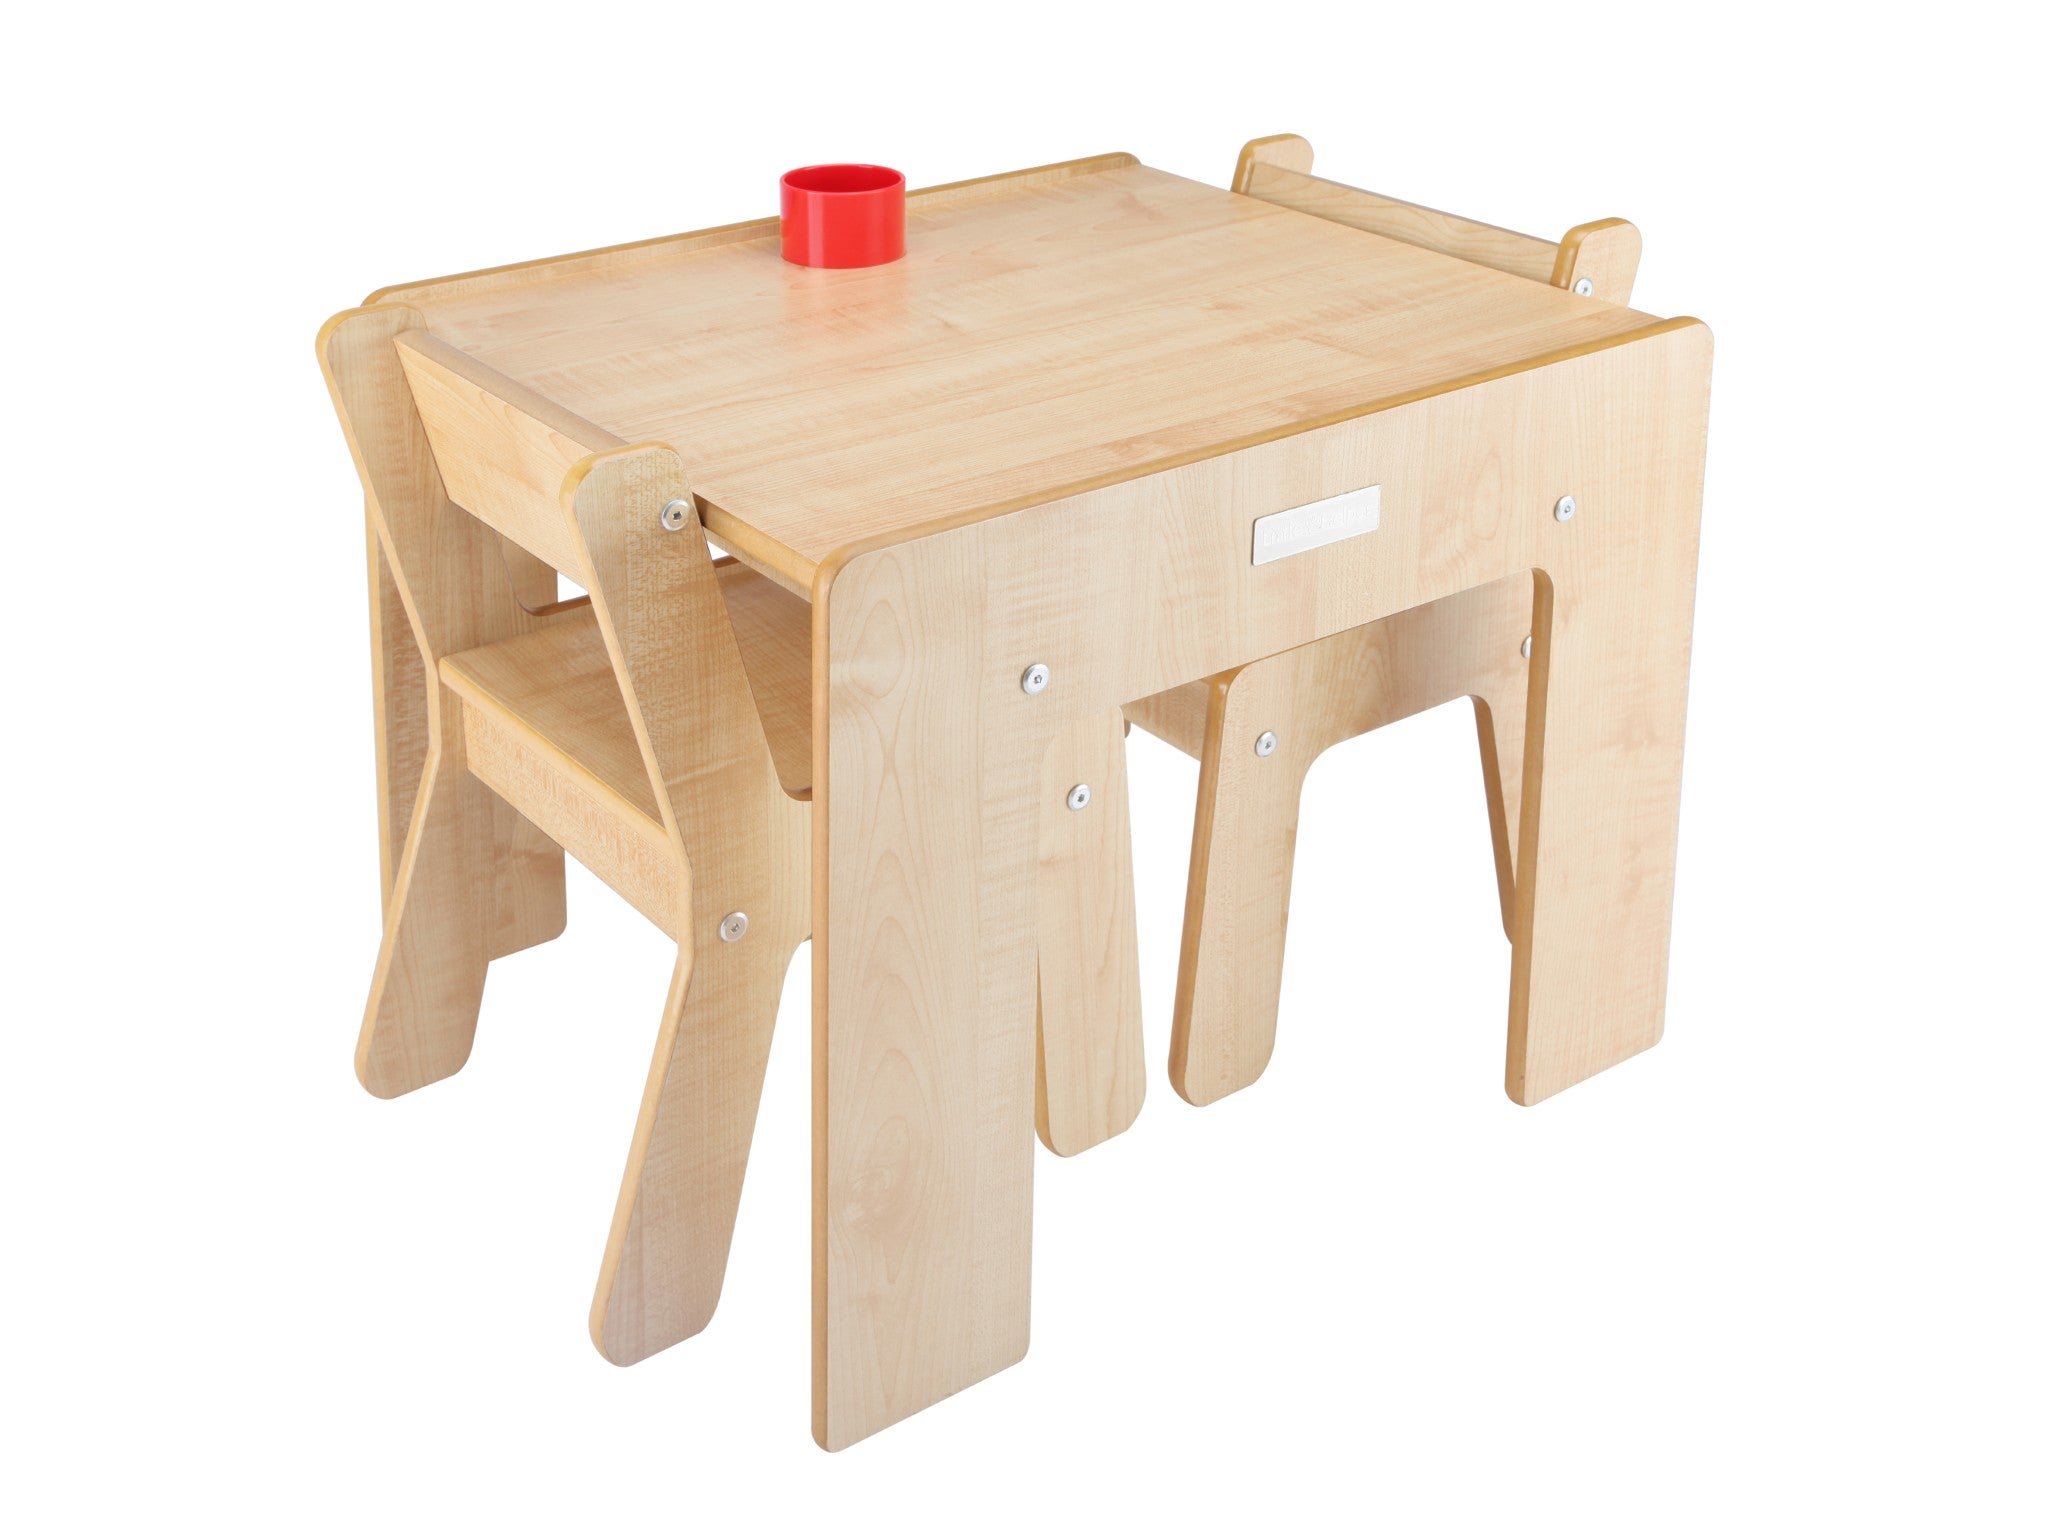 https://static.independent.co.uk/2021/05/26/12/Little%20Helper%20wooden%20funstation%20duo%20kids%20table%20and%20chairs%20set%20indybest.jpeg